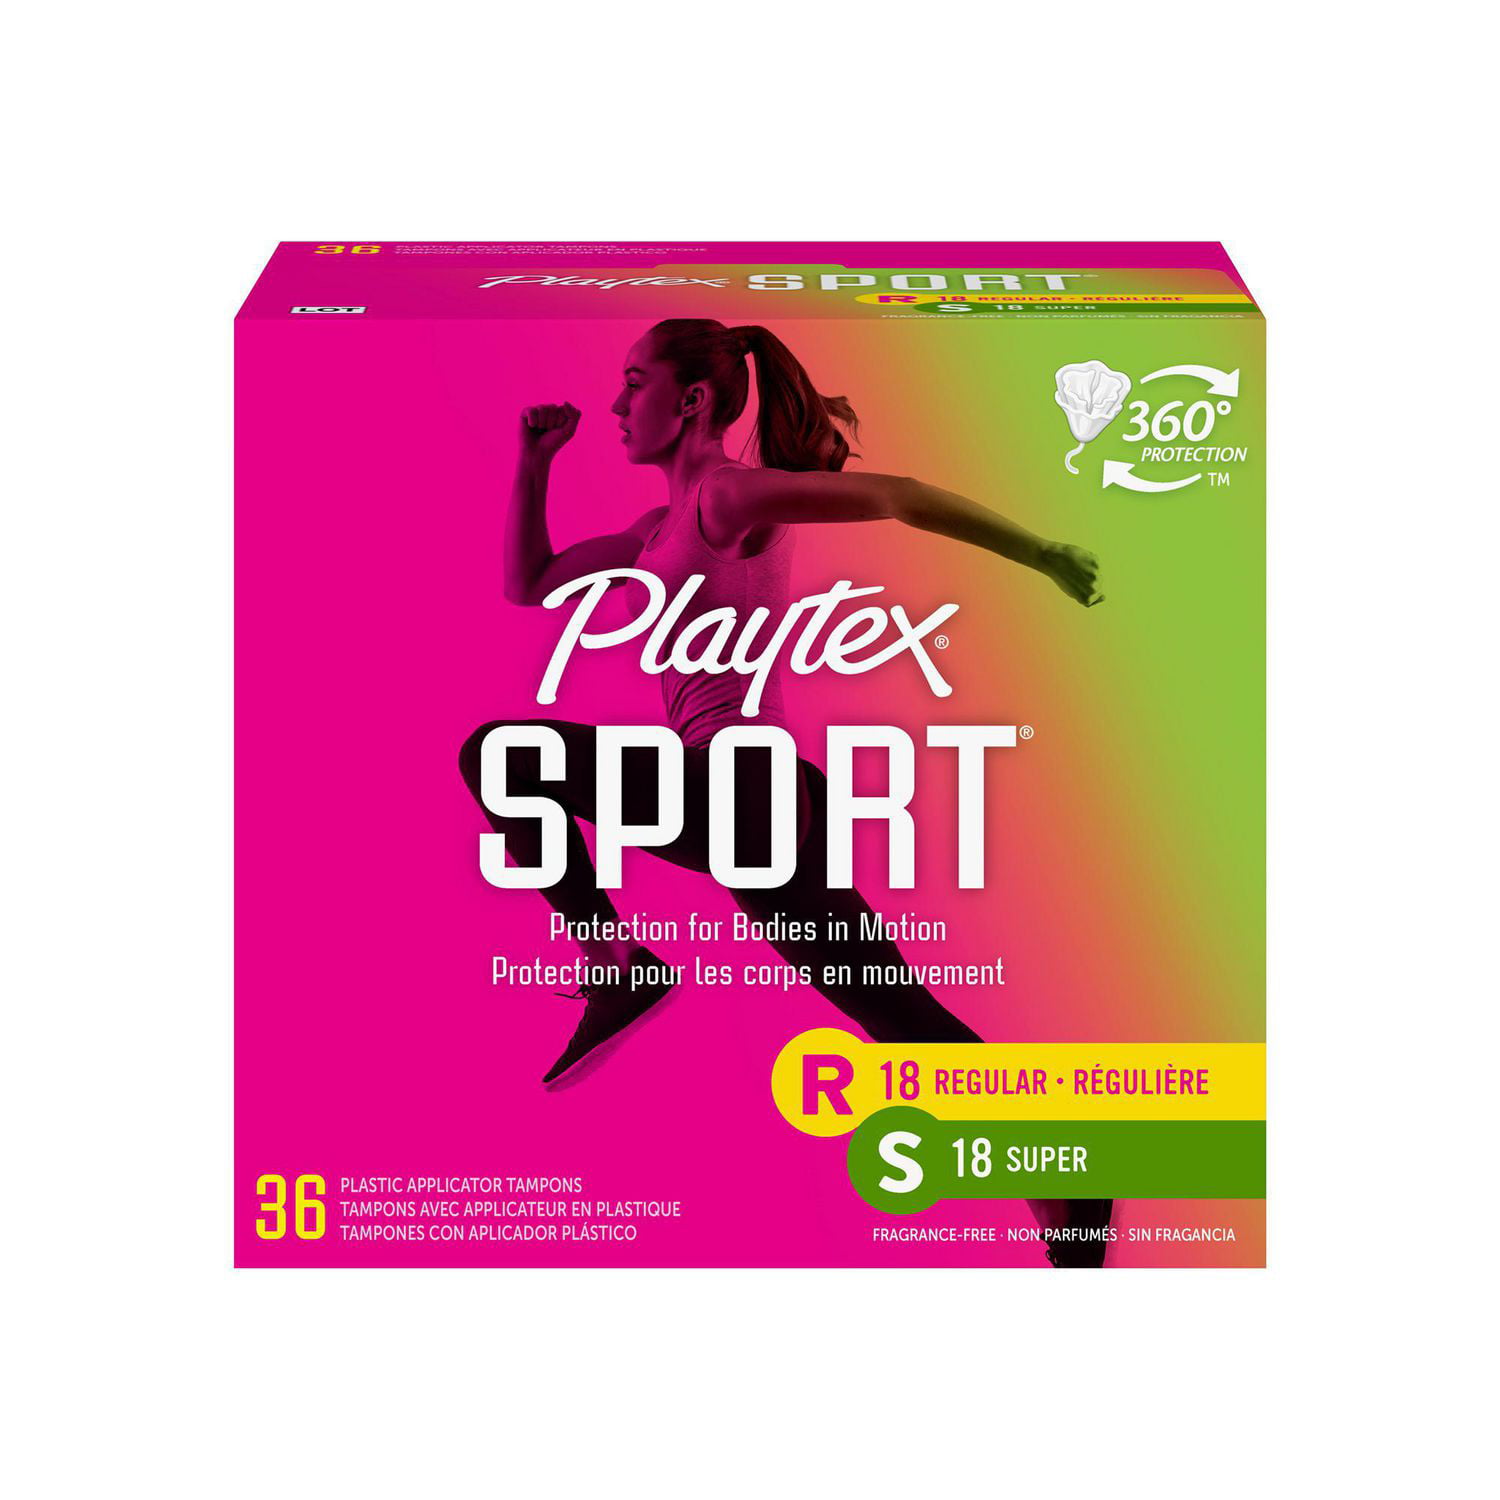 Playtex Sport Tampons with Flex-Fit Technology, Mixed Pack of Regular,  Super Tampons, Buy Women Hygiene products online in India